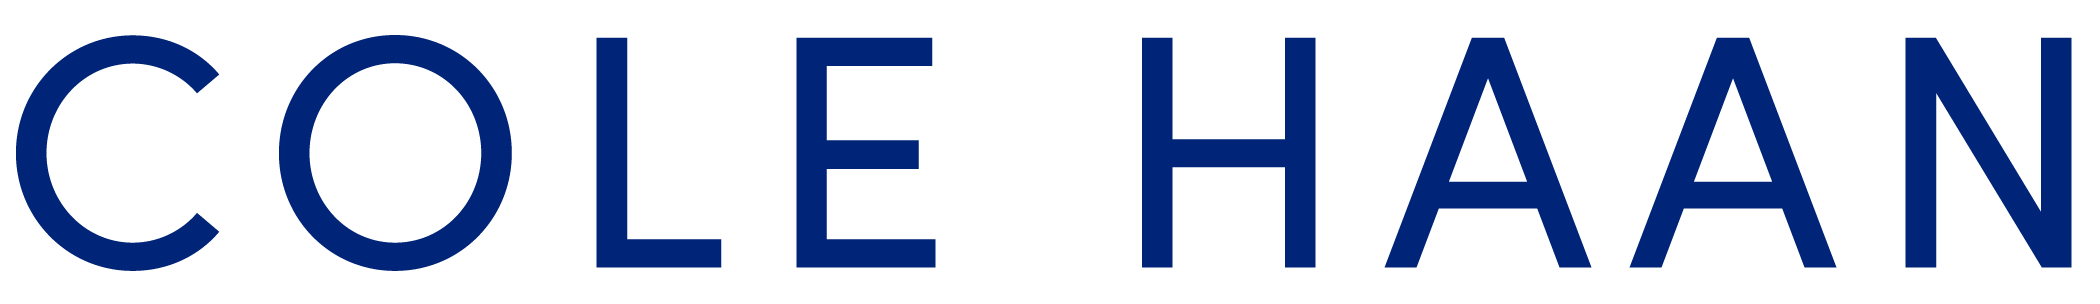 Cole Haan Logo - Cole Haan Competitors, Revenue and Employees - Owler Company Profile